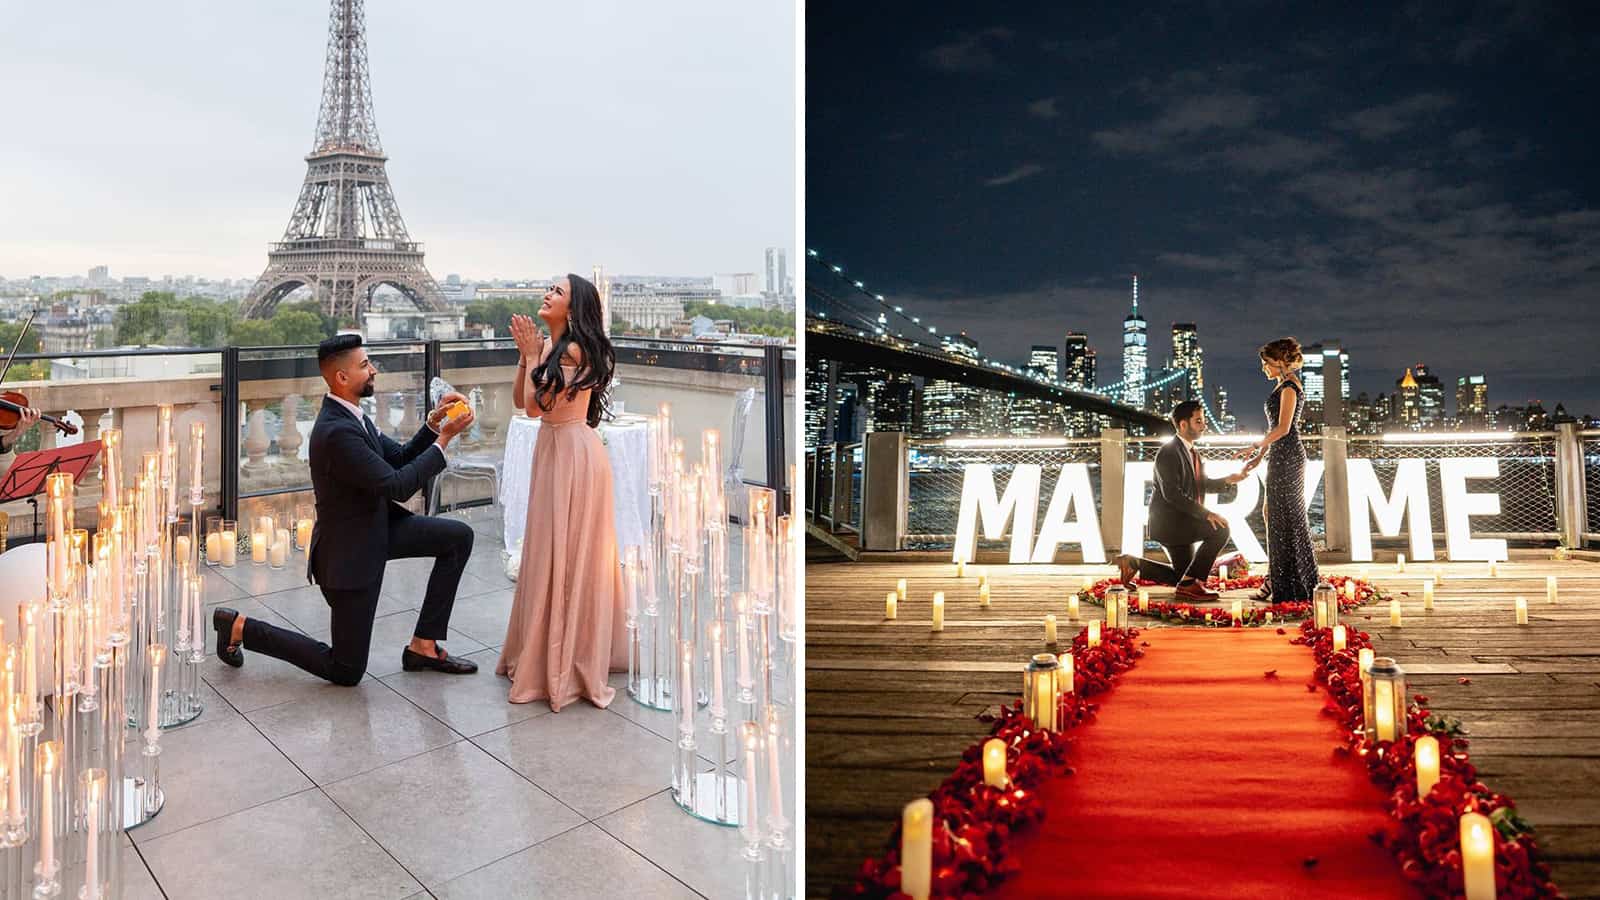 Instagram Users Share The Sweetest Marriage Proposal Ideas Ever